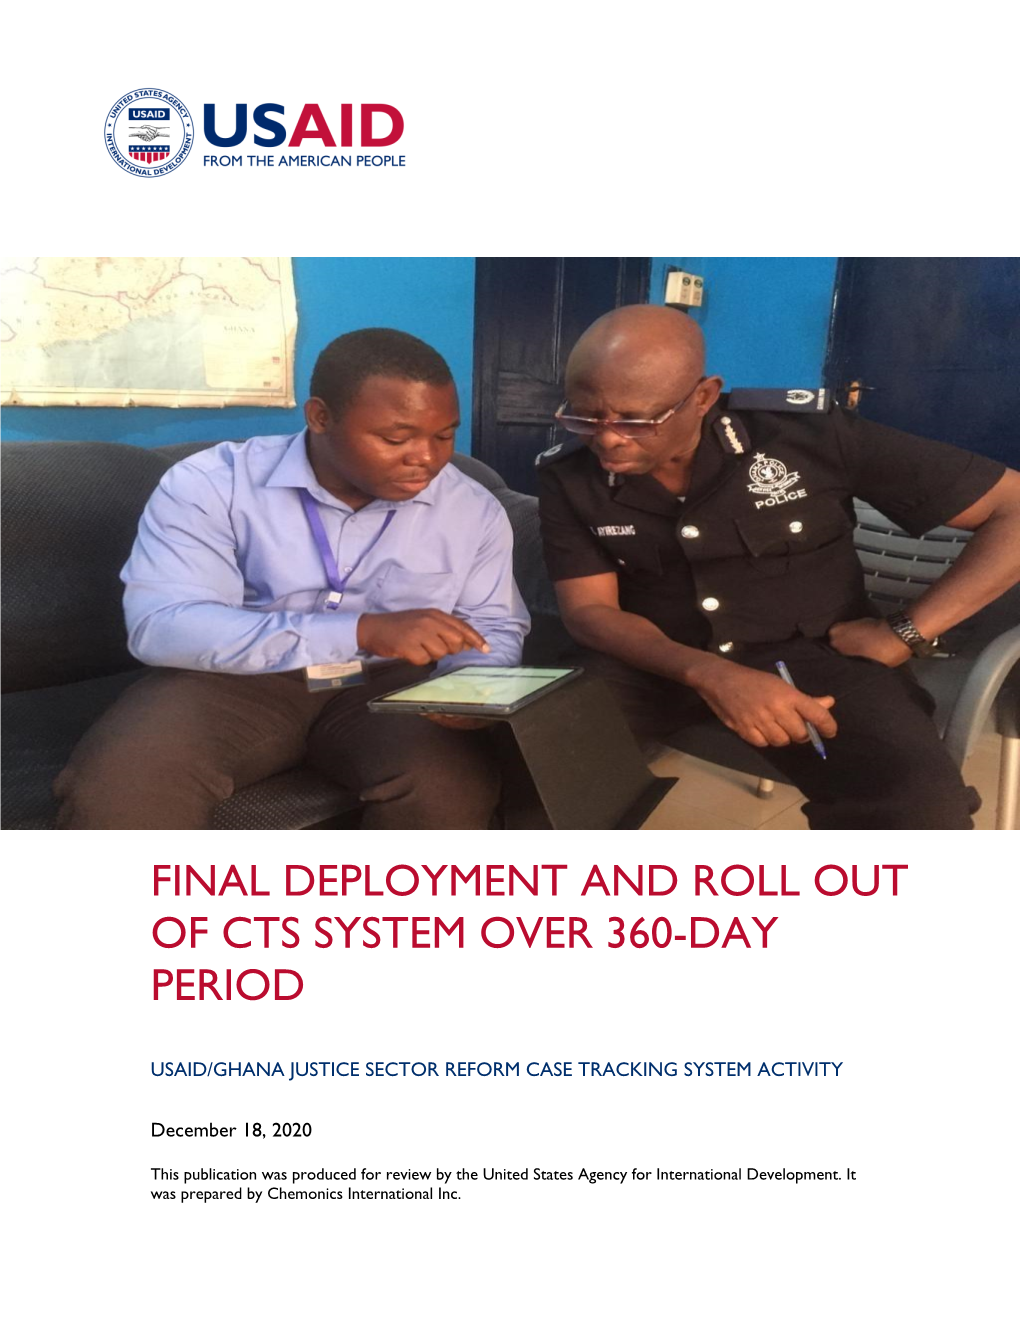 Final Deployment and Roll out of Cts System Over 360-Day Period